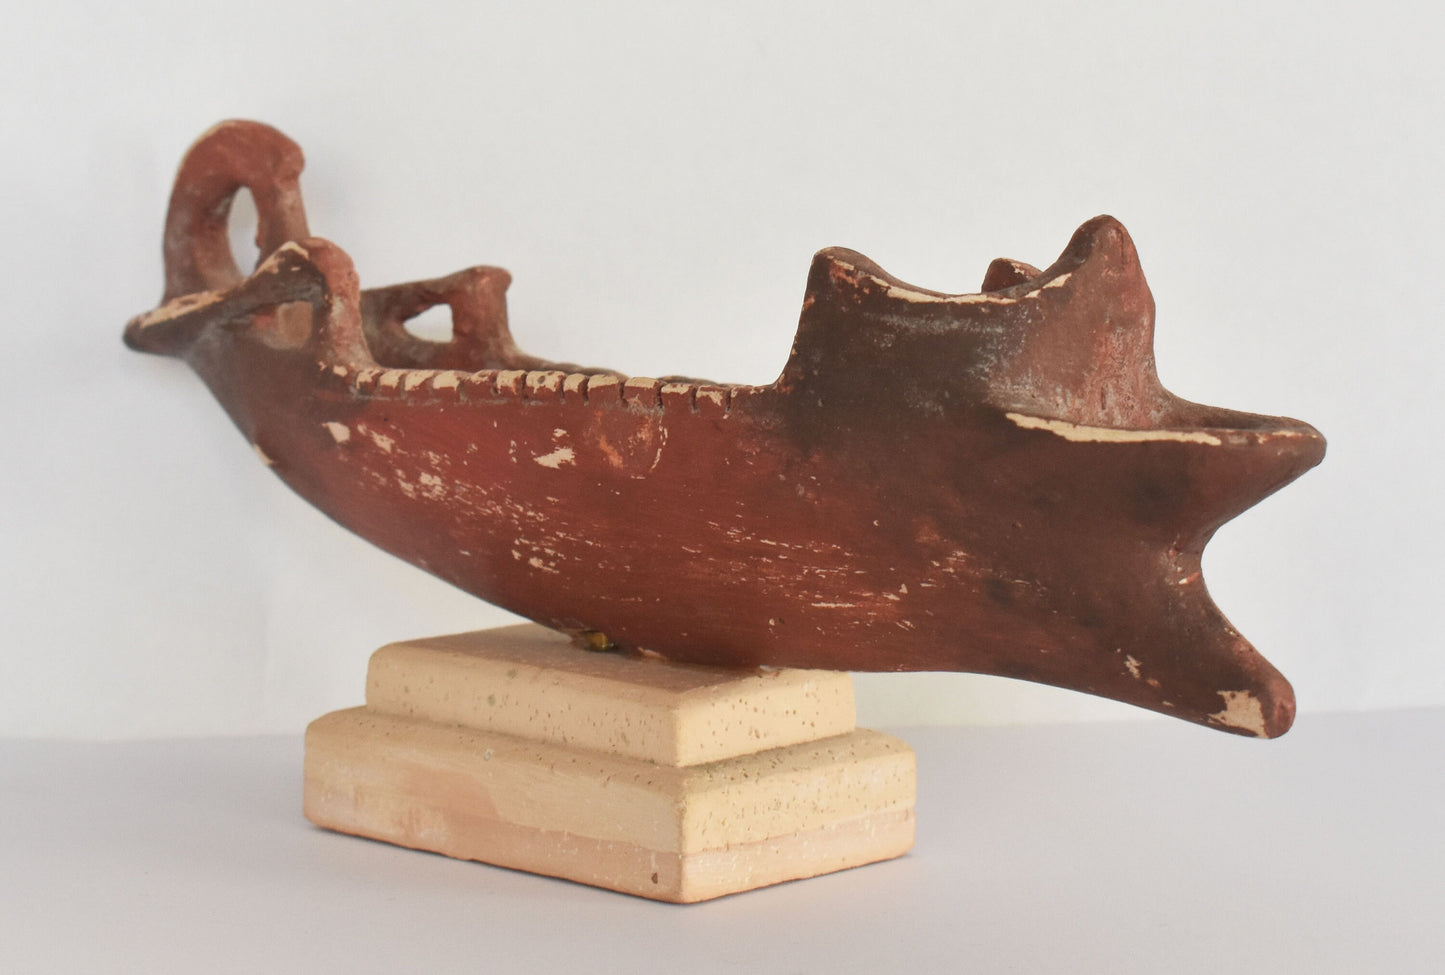 Terracotta Oil Lamp in the shape of a Ship - Ancient Greece - Museum Reproduction - Ceramic Artifact